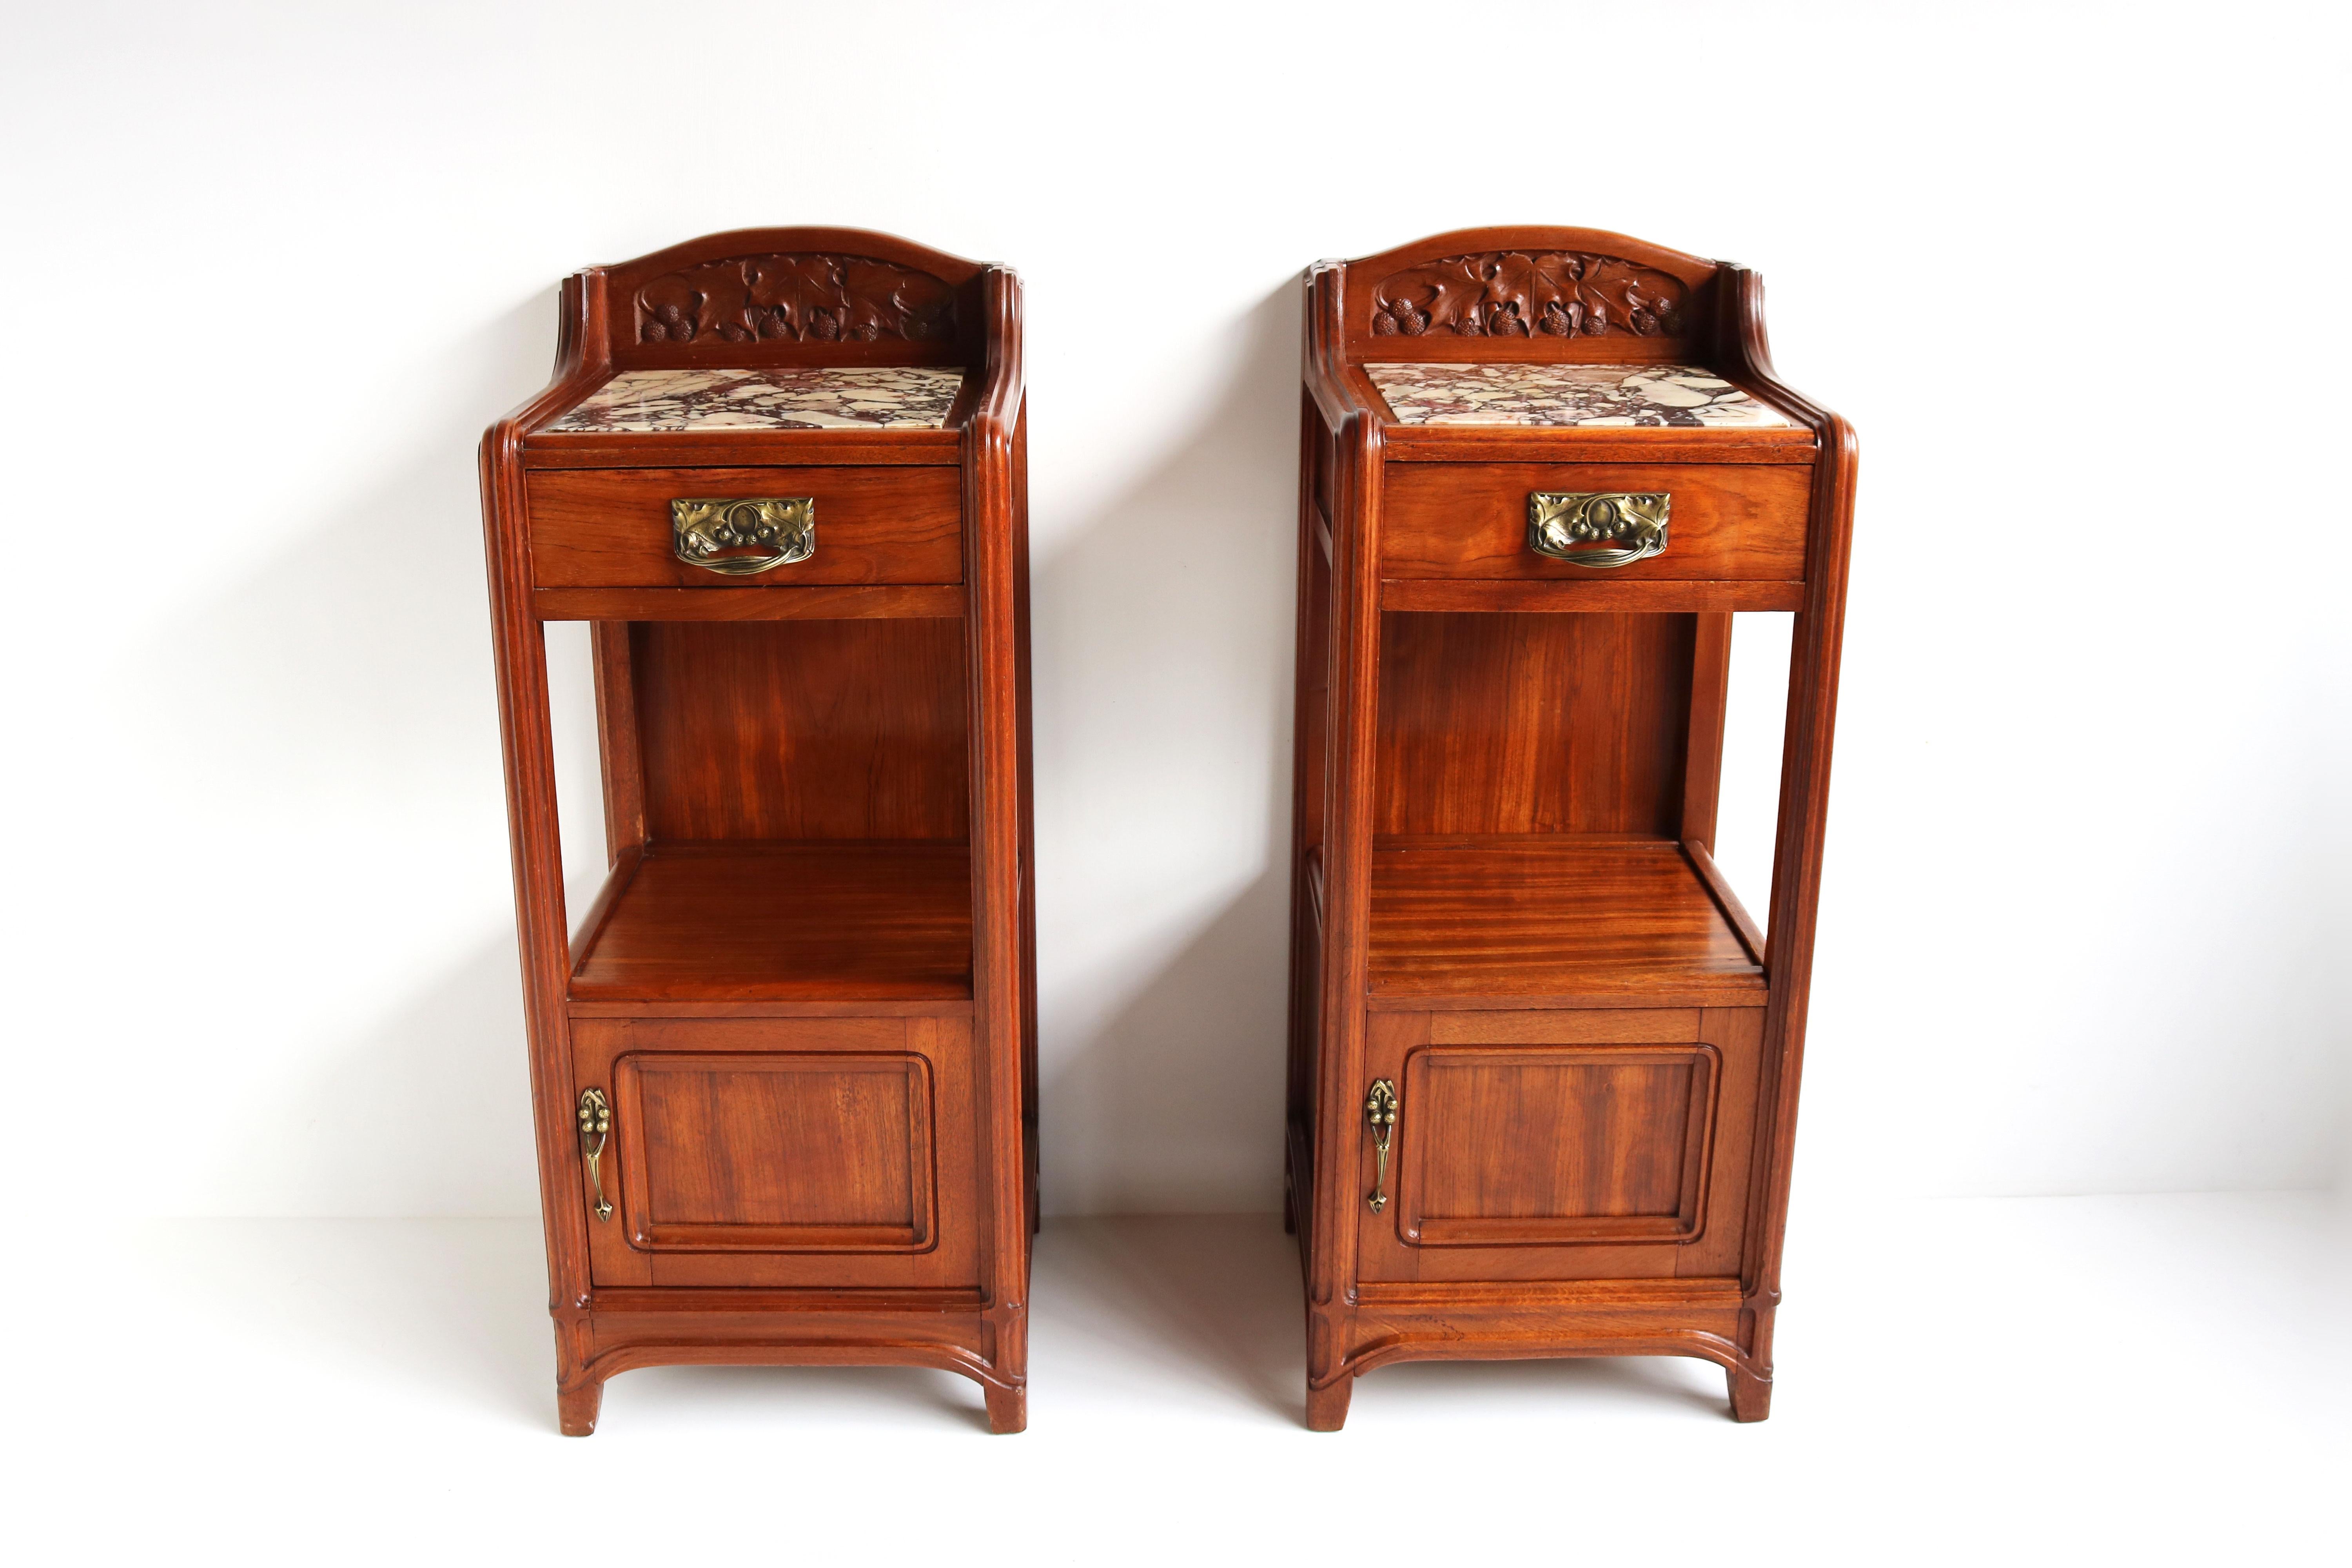 Breathtaking & Luxurious ! This pair of French design Art Nouveau nightstands / bedside tables by Paul Alexandre Dumas. 
Paul Alexandre Dumas a French cabinet maker who worked with / was a pupil of the famous art nouveau designer Louis Majorelle.